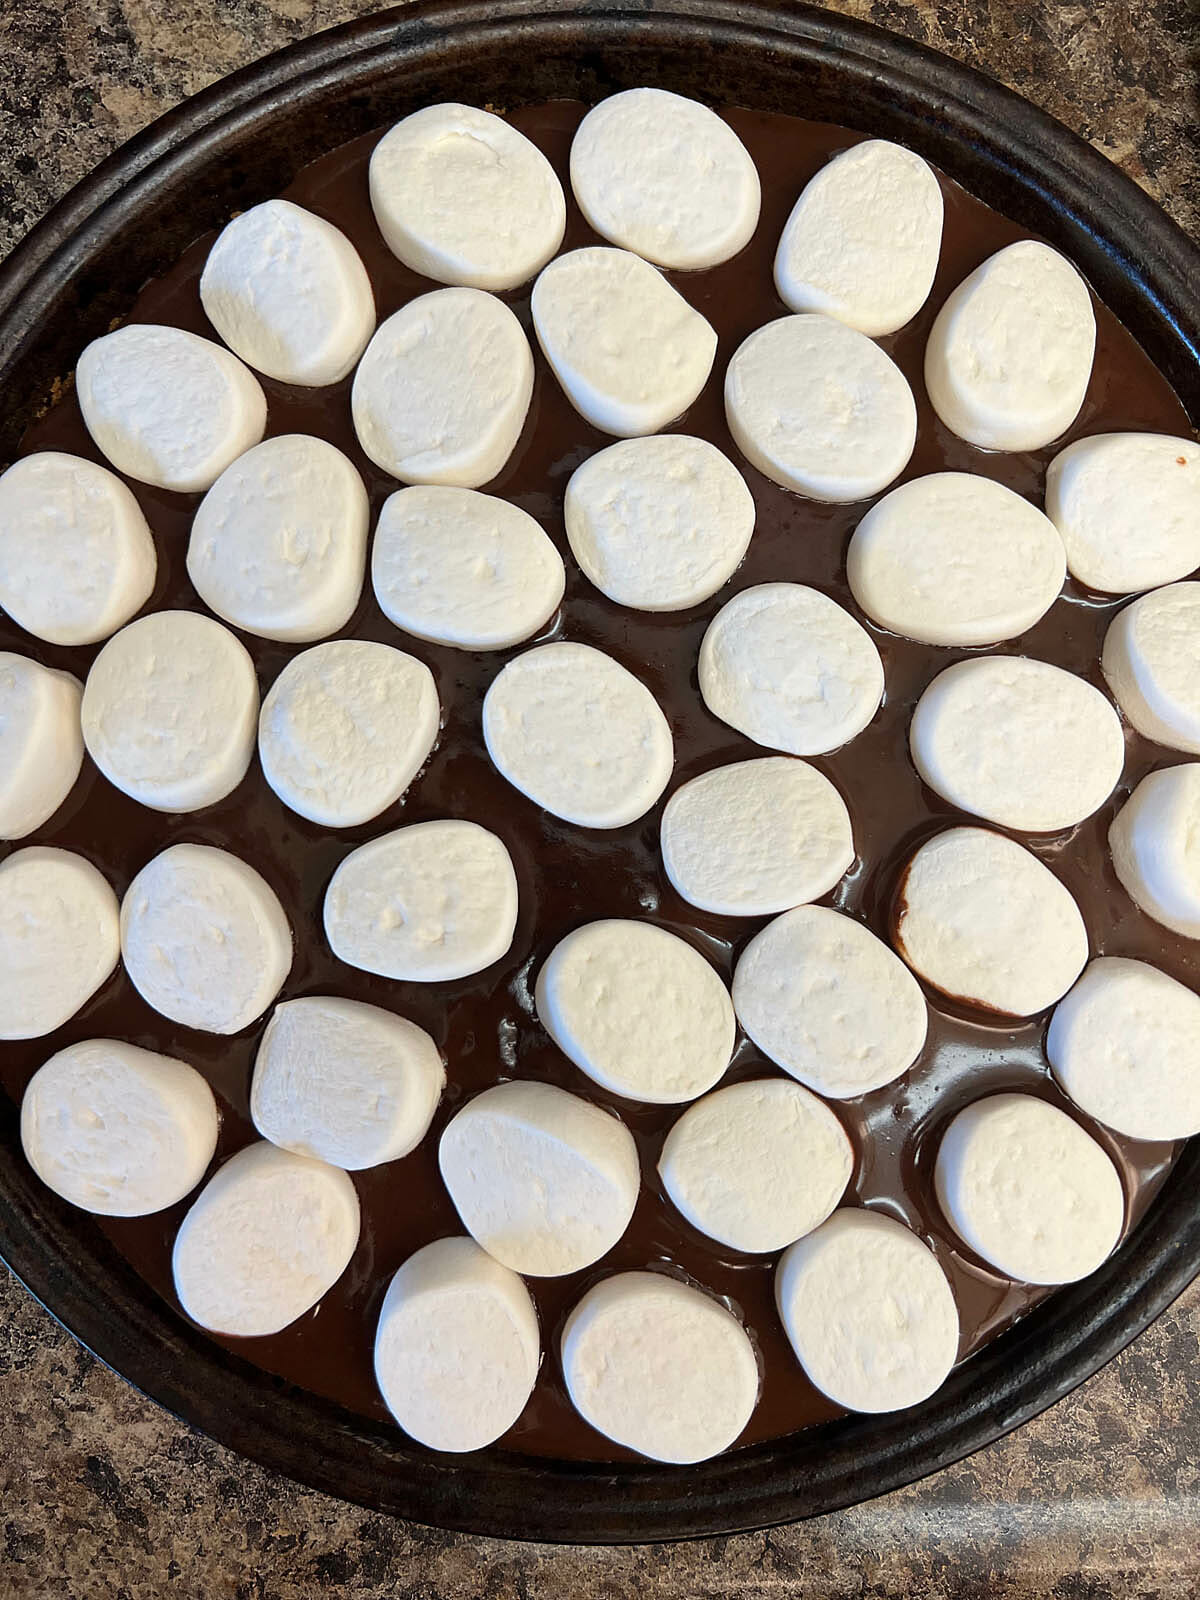 Marshmallows on top of chocolate.